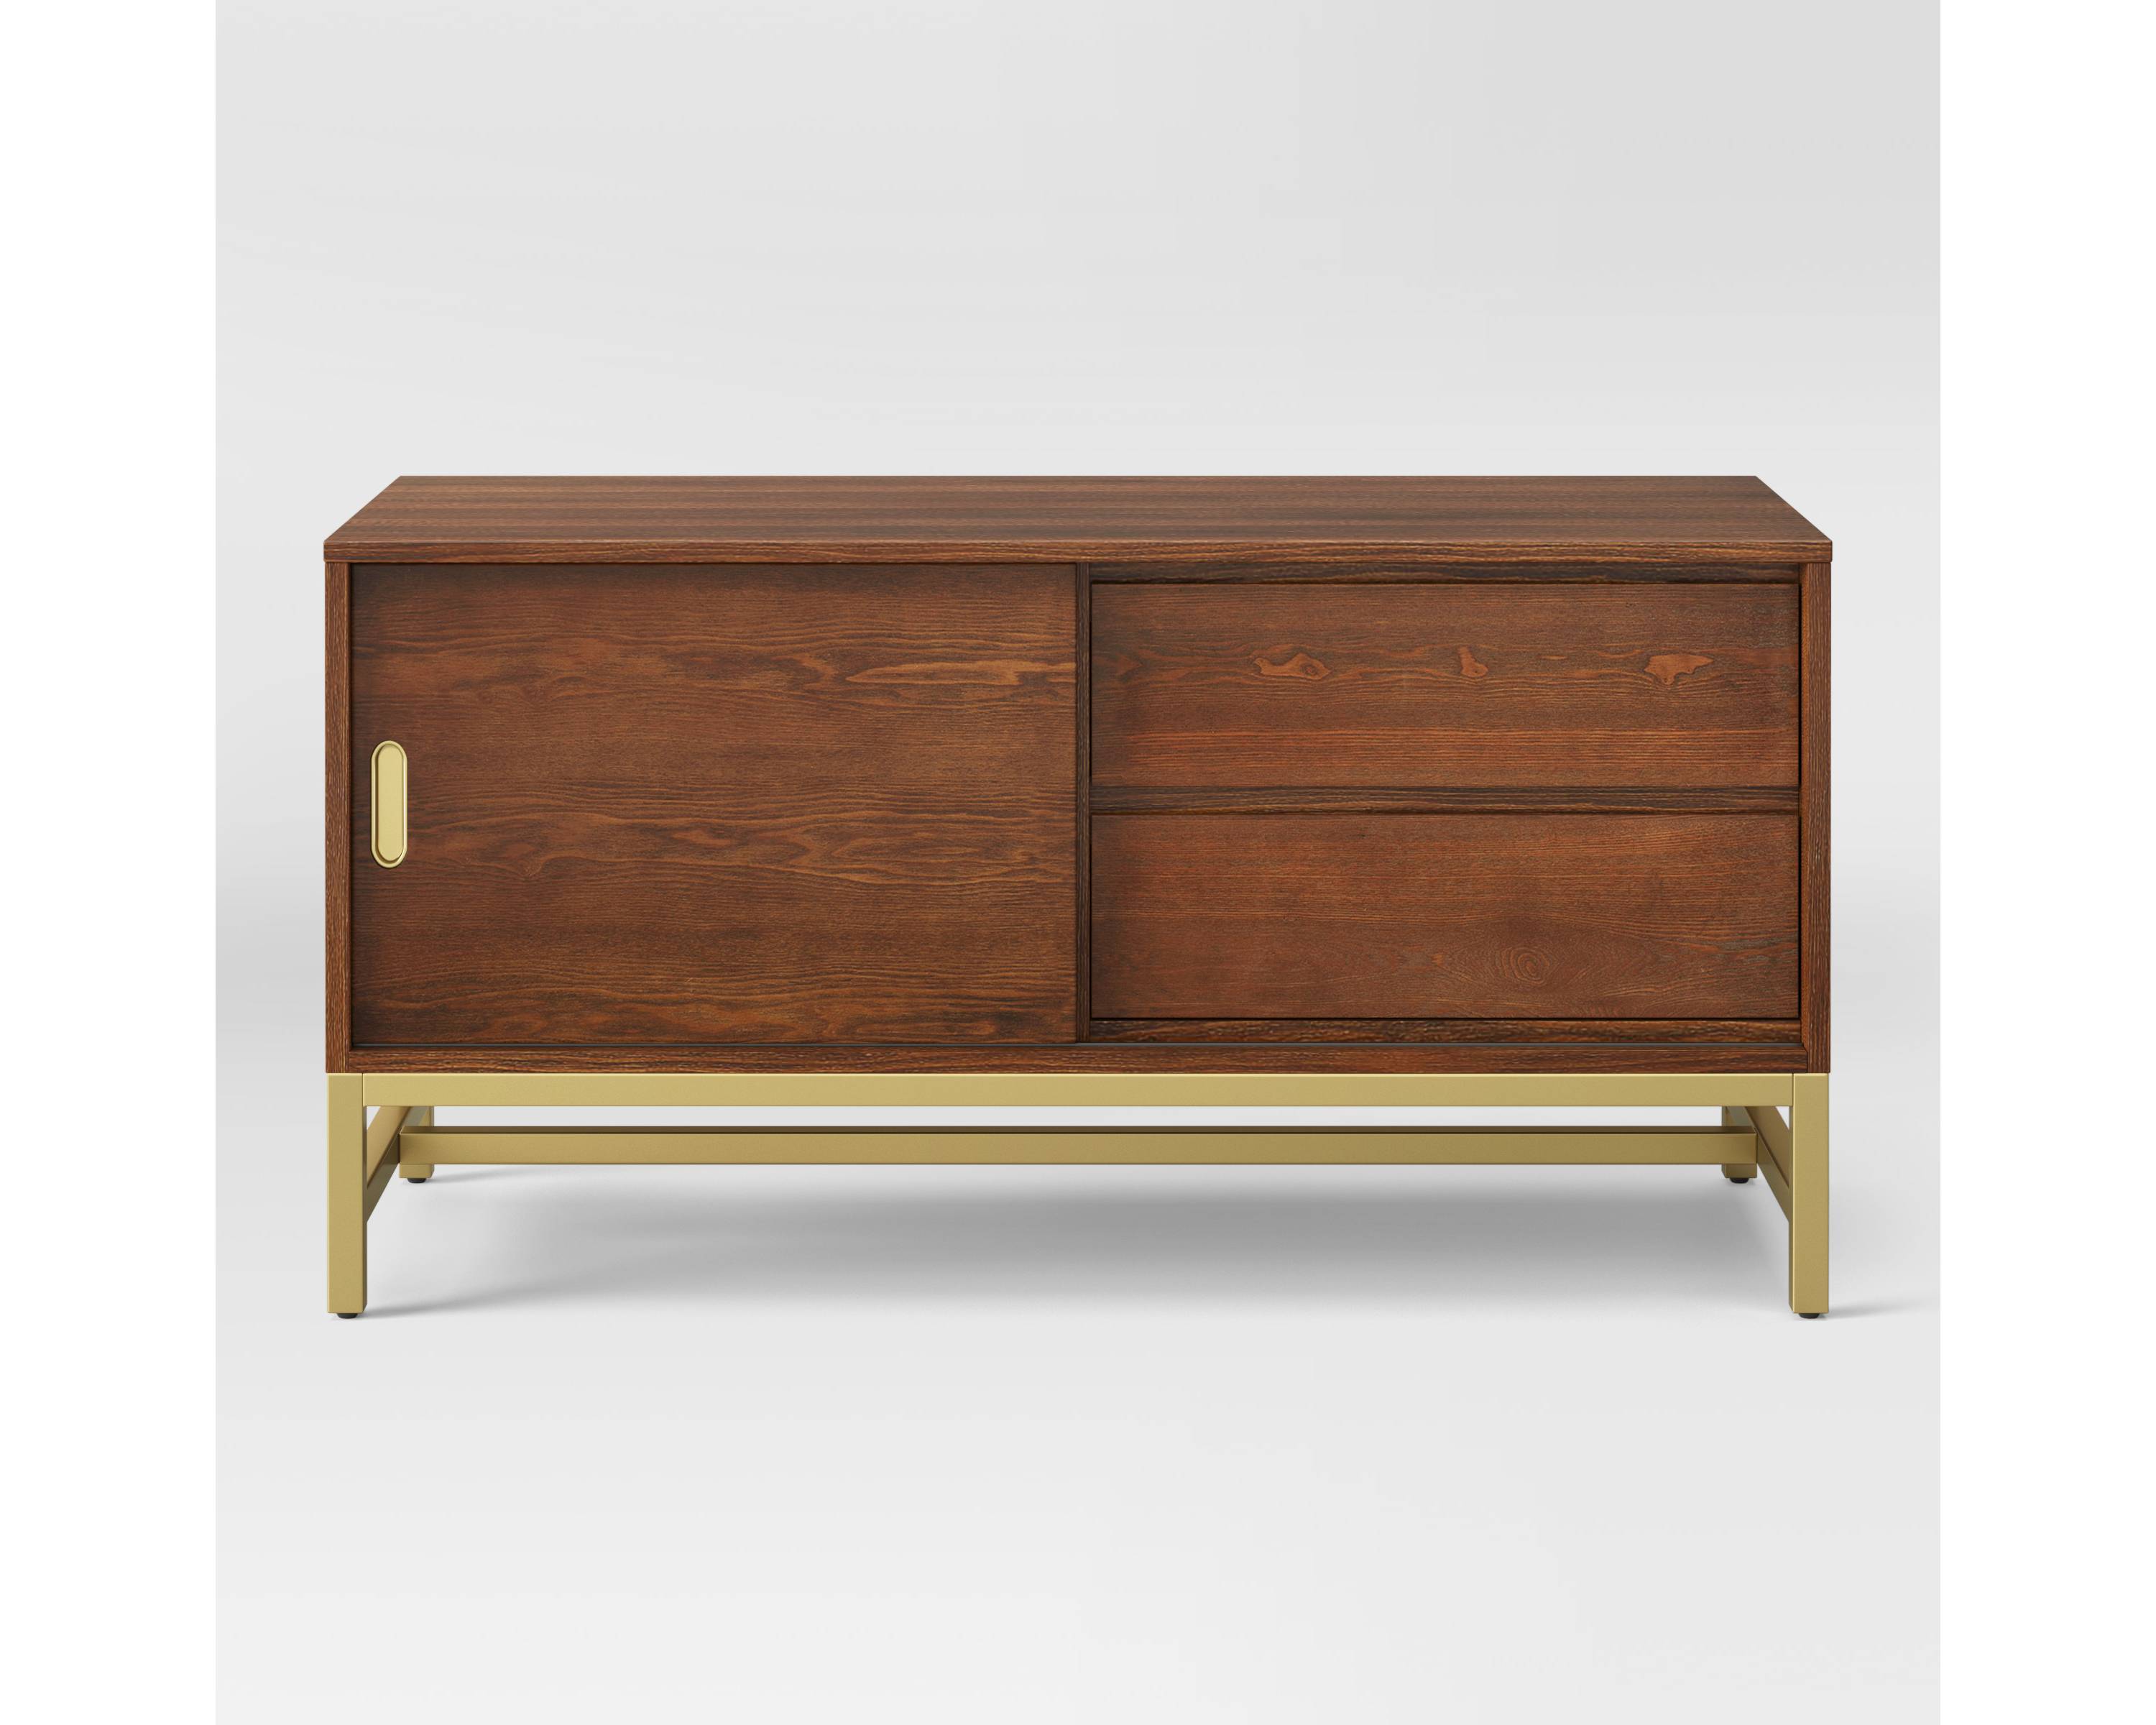 nesting target new project only looks expensive pulp credenza mawr metal accent table antwerp entertainment stand timber legs oval brass coffee magnussen allure end cool round